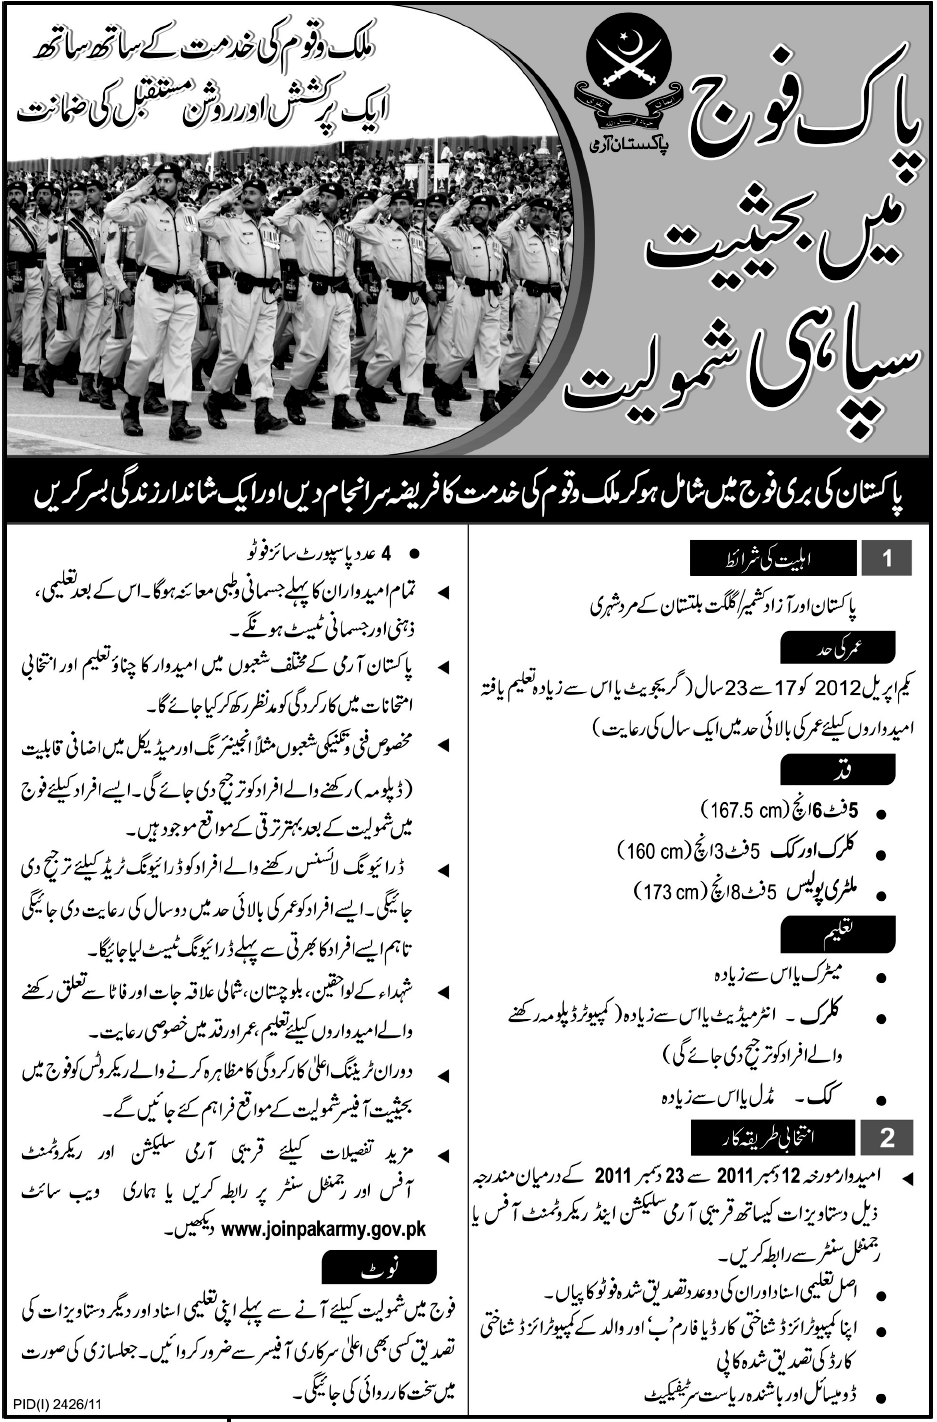 Join Pakistan Army as a Soldier